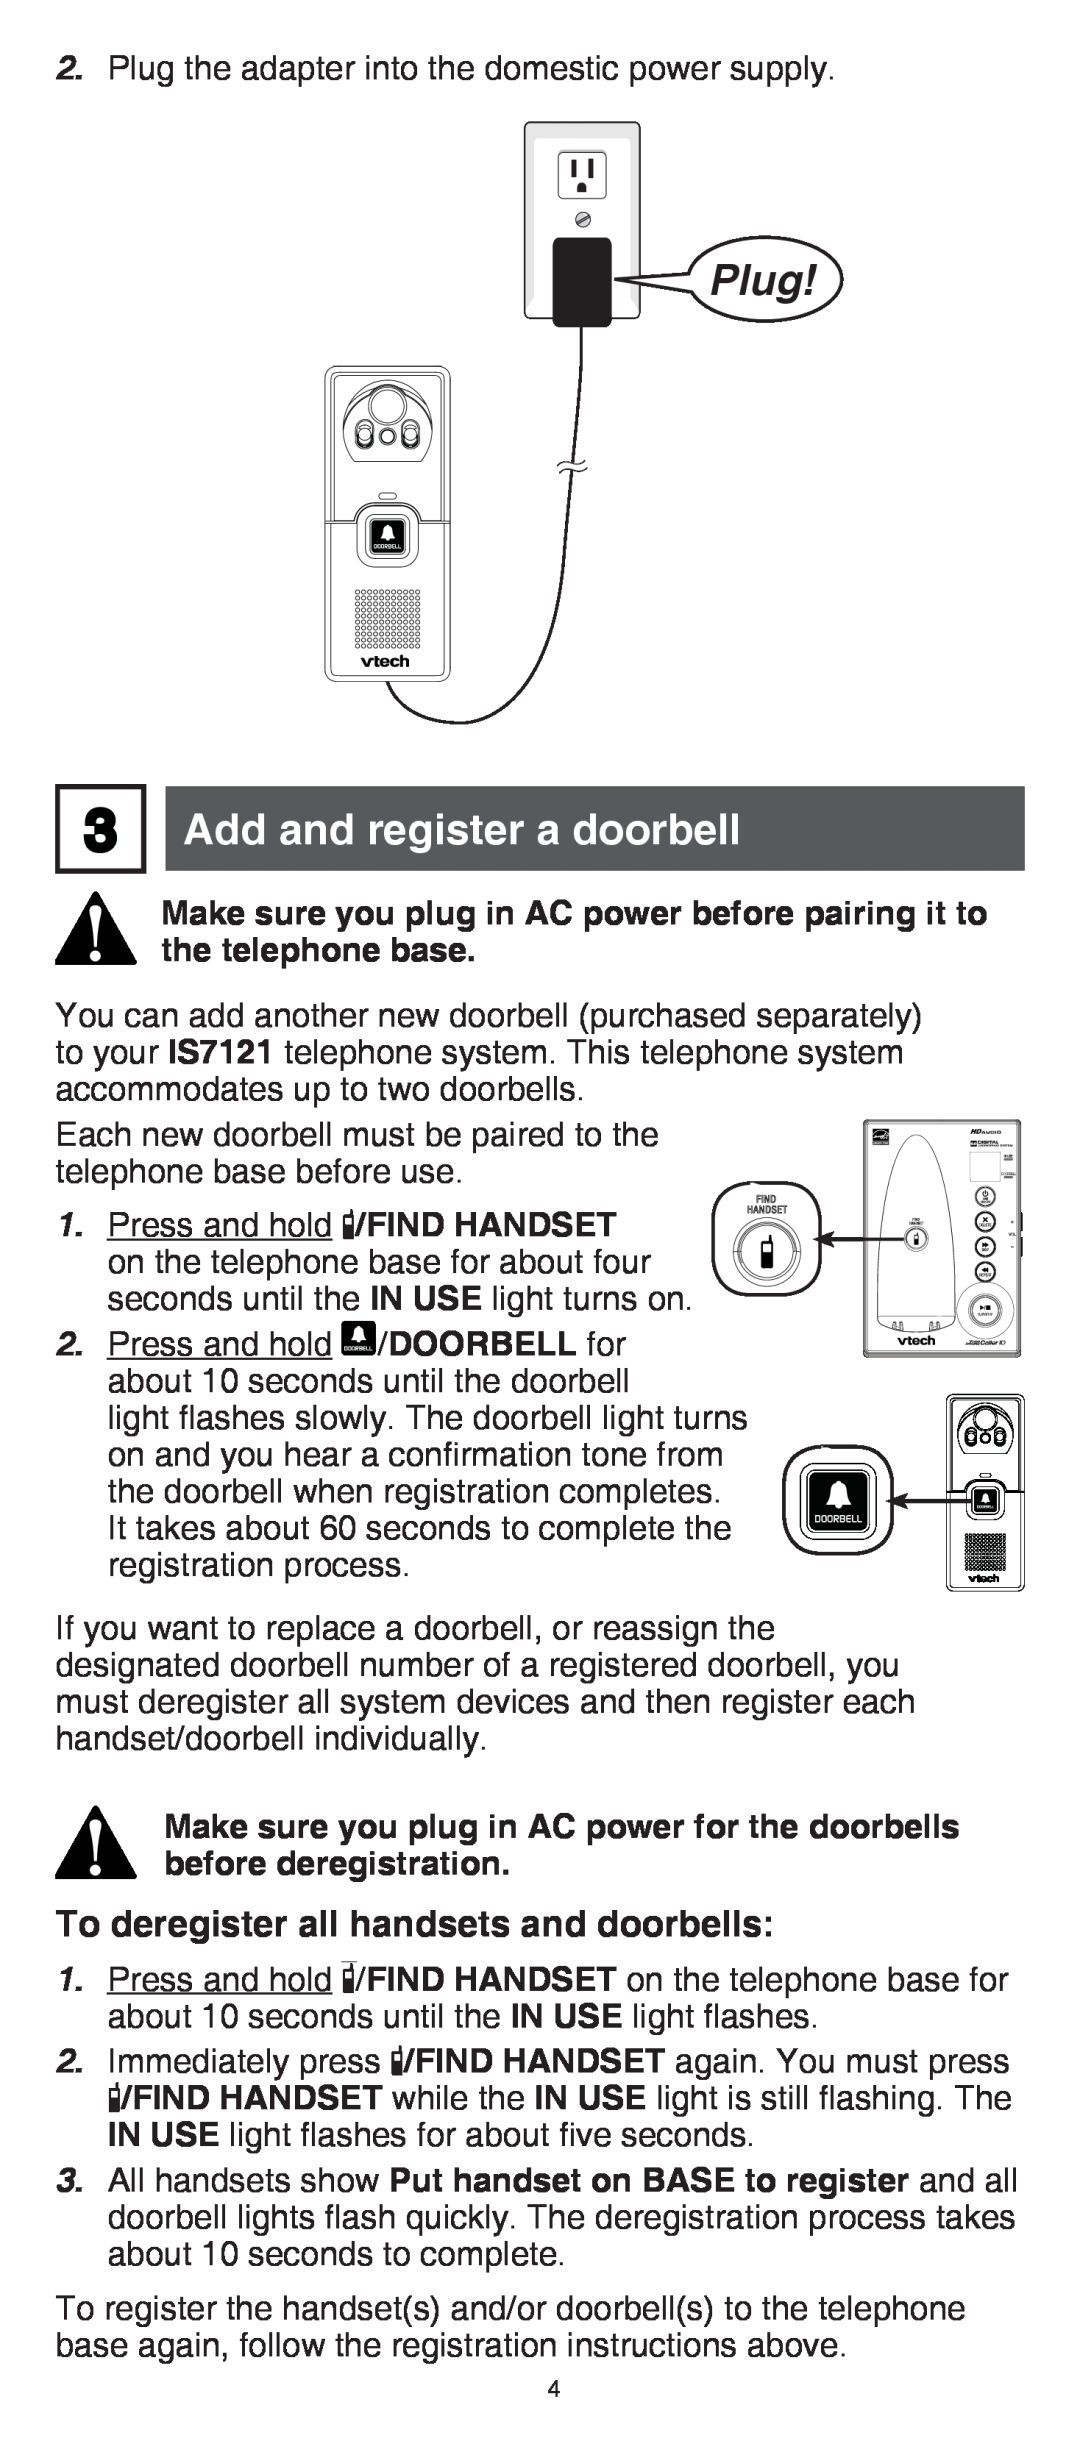 VTech IS7121/IS7121-2/IS7121-22 user manual Plug, Add and register a doorbell, To deregister all handsets and doorbells 